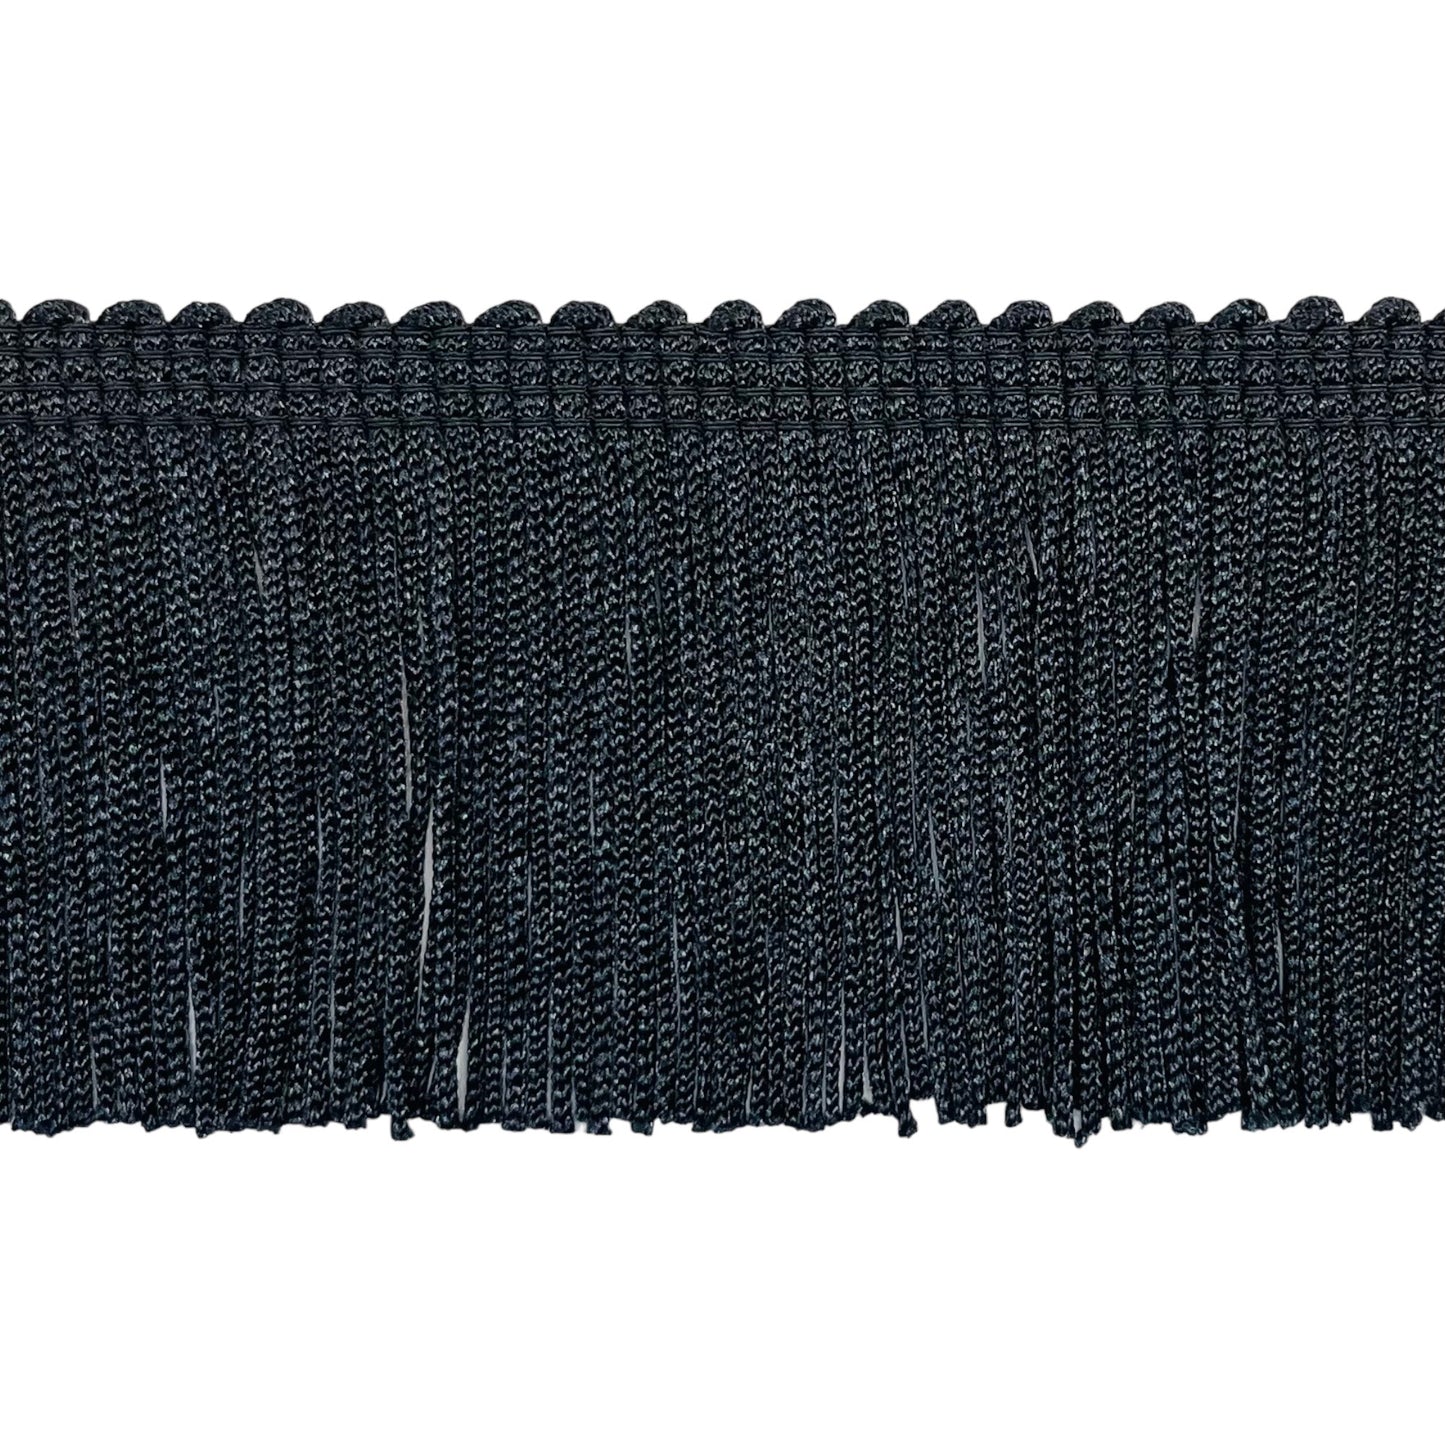 2" Stretch Chainette Fringe Trim (Sold by the Yard)